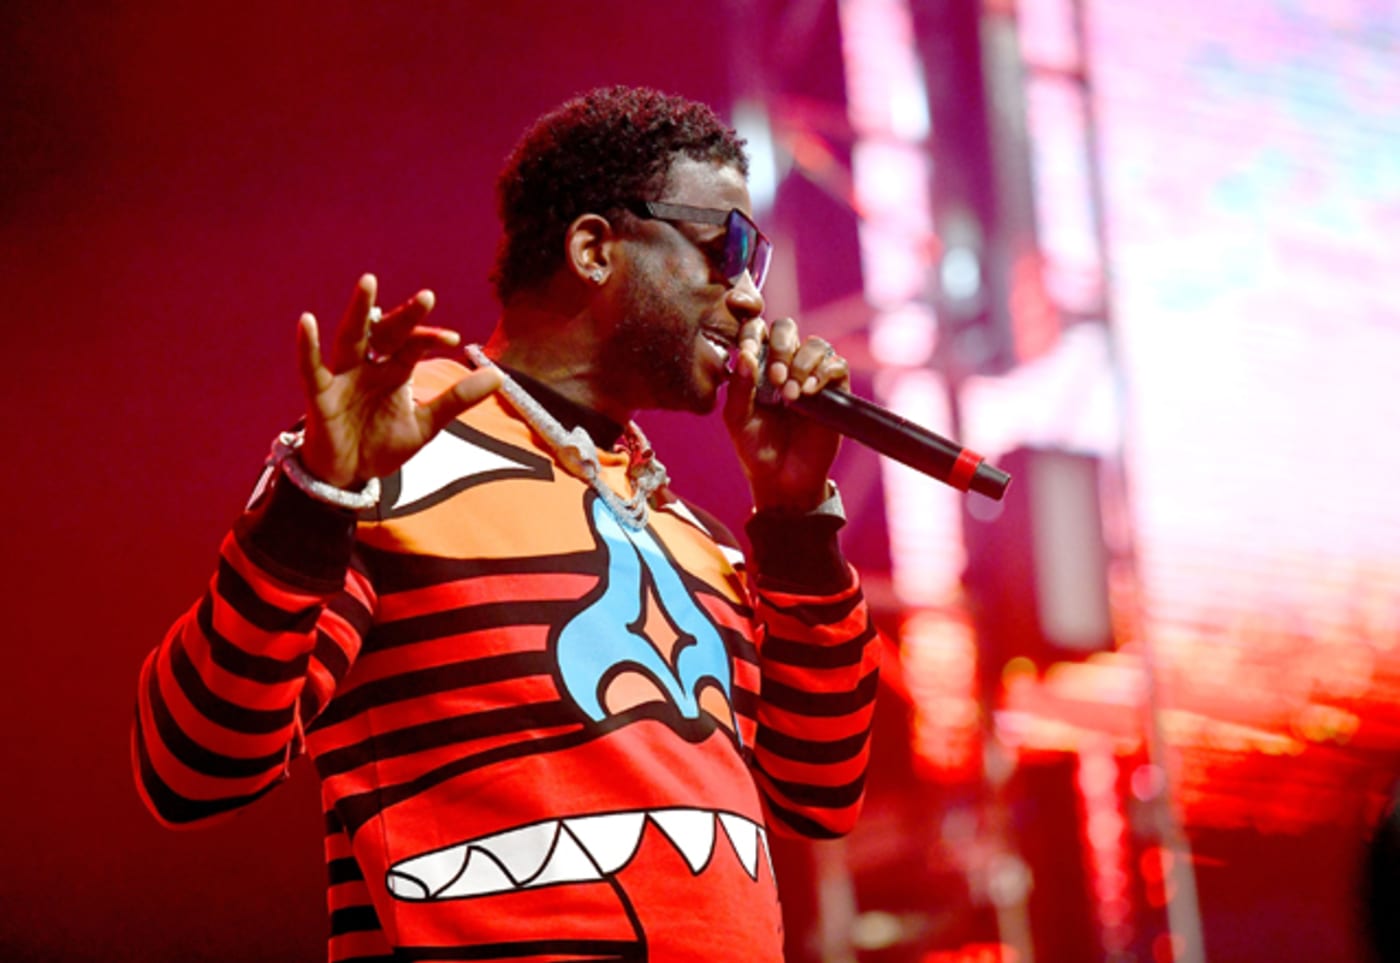 Gucci Mane performs onstage at the Rolling Loud Festival